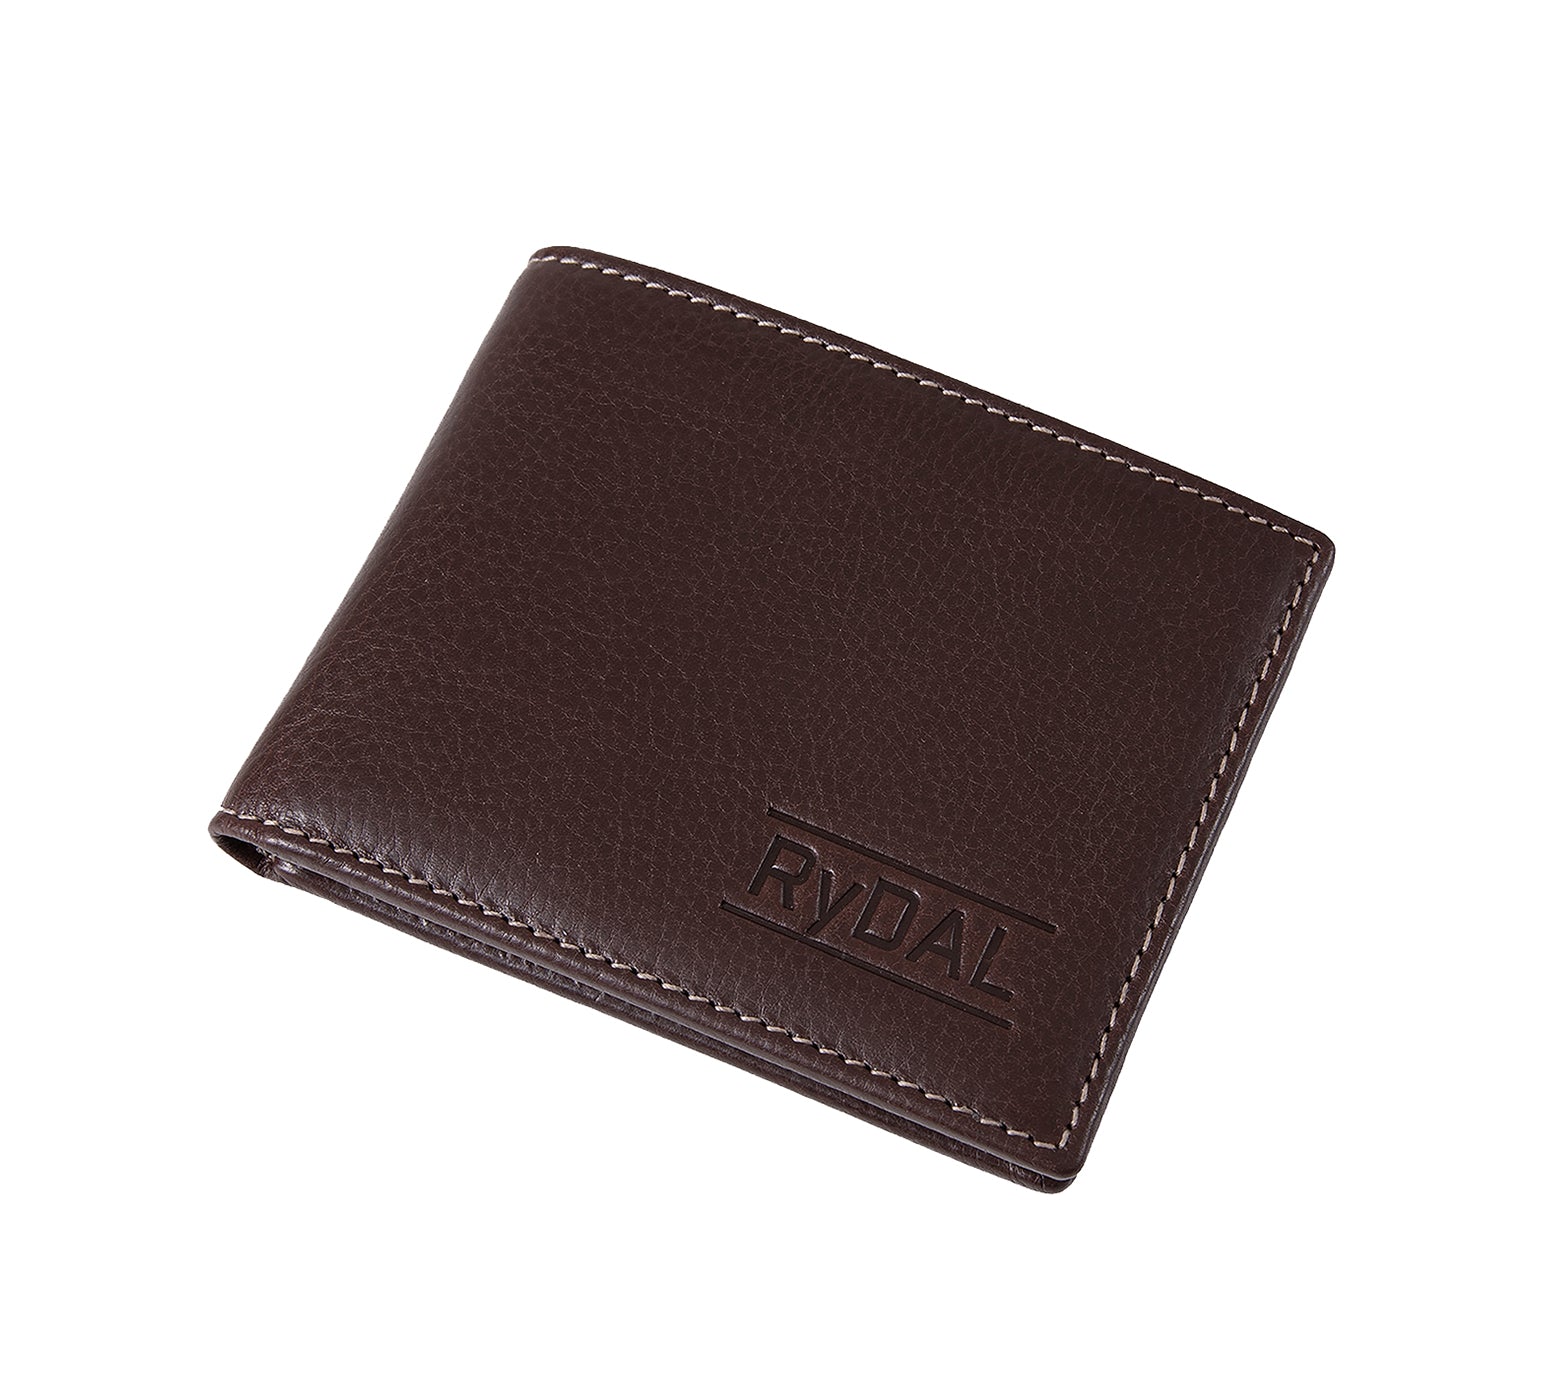 Mens Leather Wallet with Coin Pocket from Rydal in 'Dark Brown' showing wallet closed.